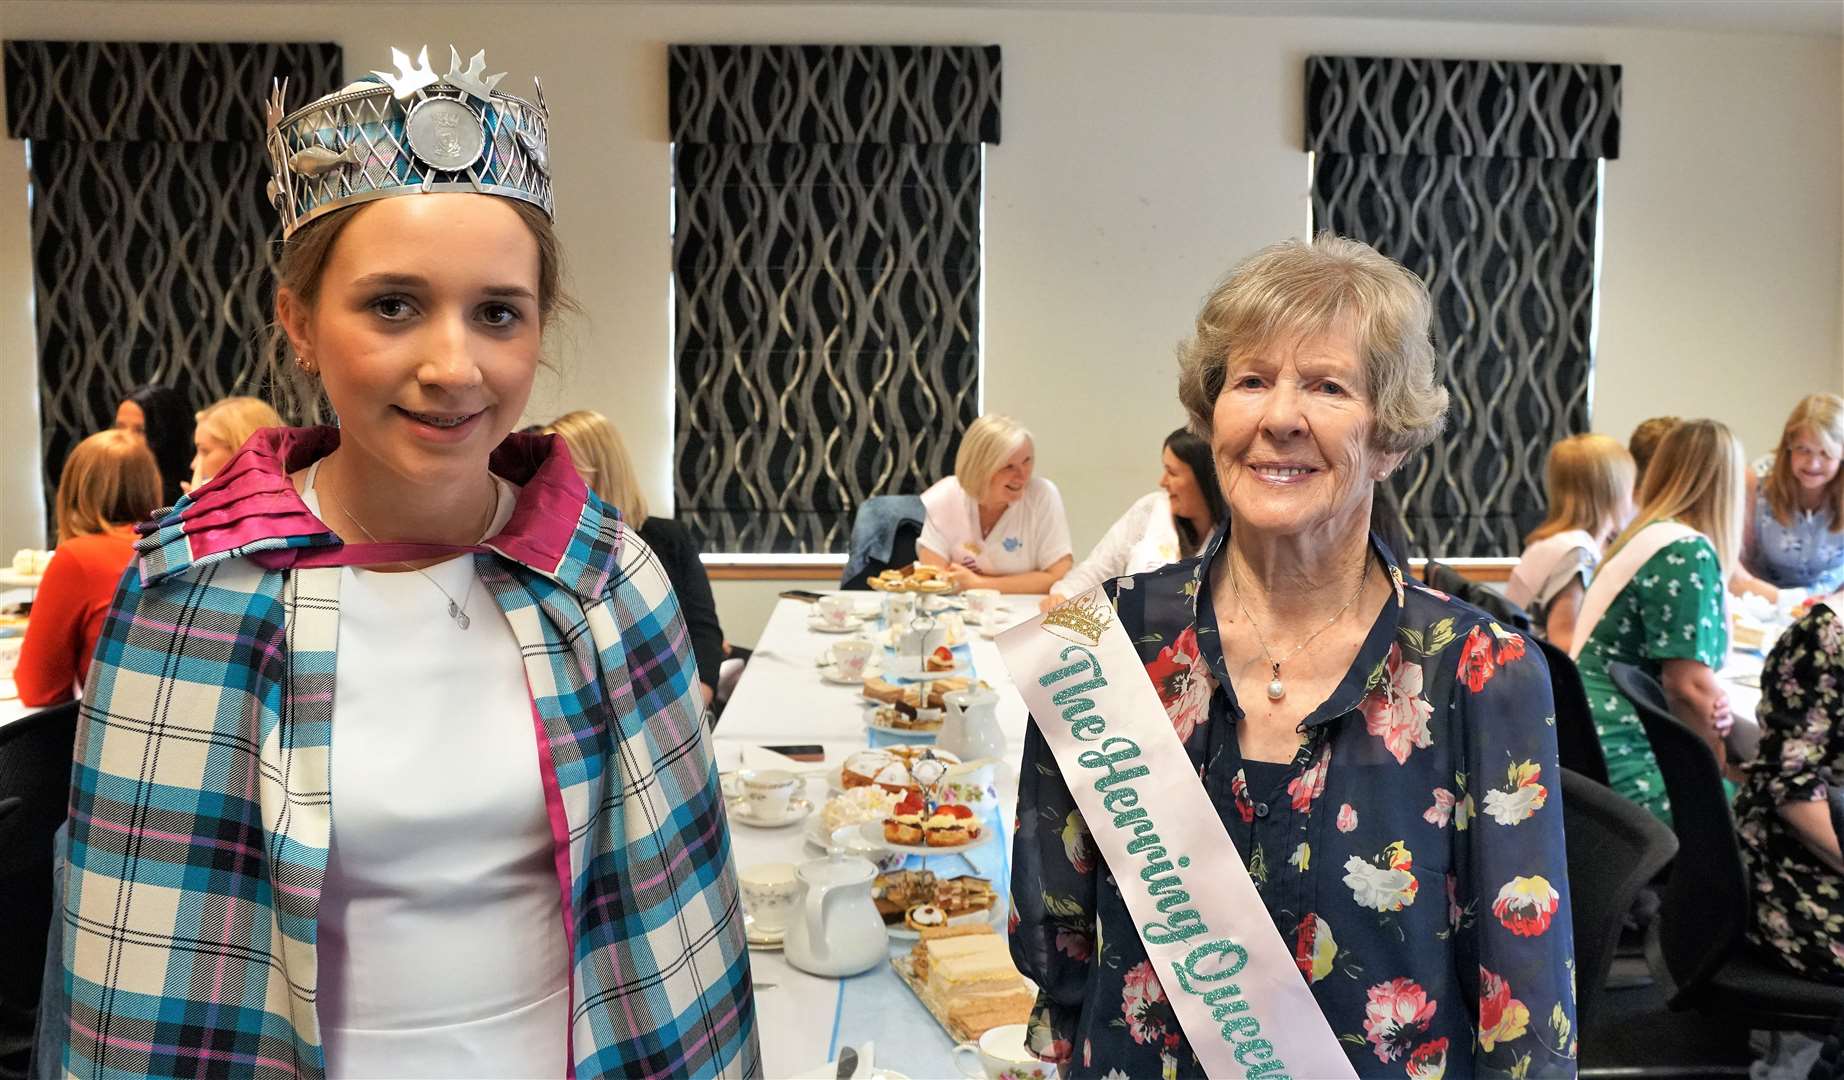 The present gala queen Abby Dunbar is pictured with the oldest queen at the event, Ray Richard, who was actually crowned as a 'herring queen' in 1949 before the title changed. Picture: DGS